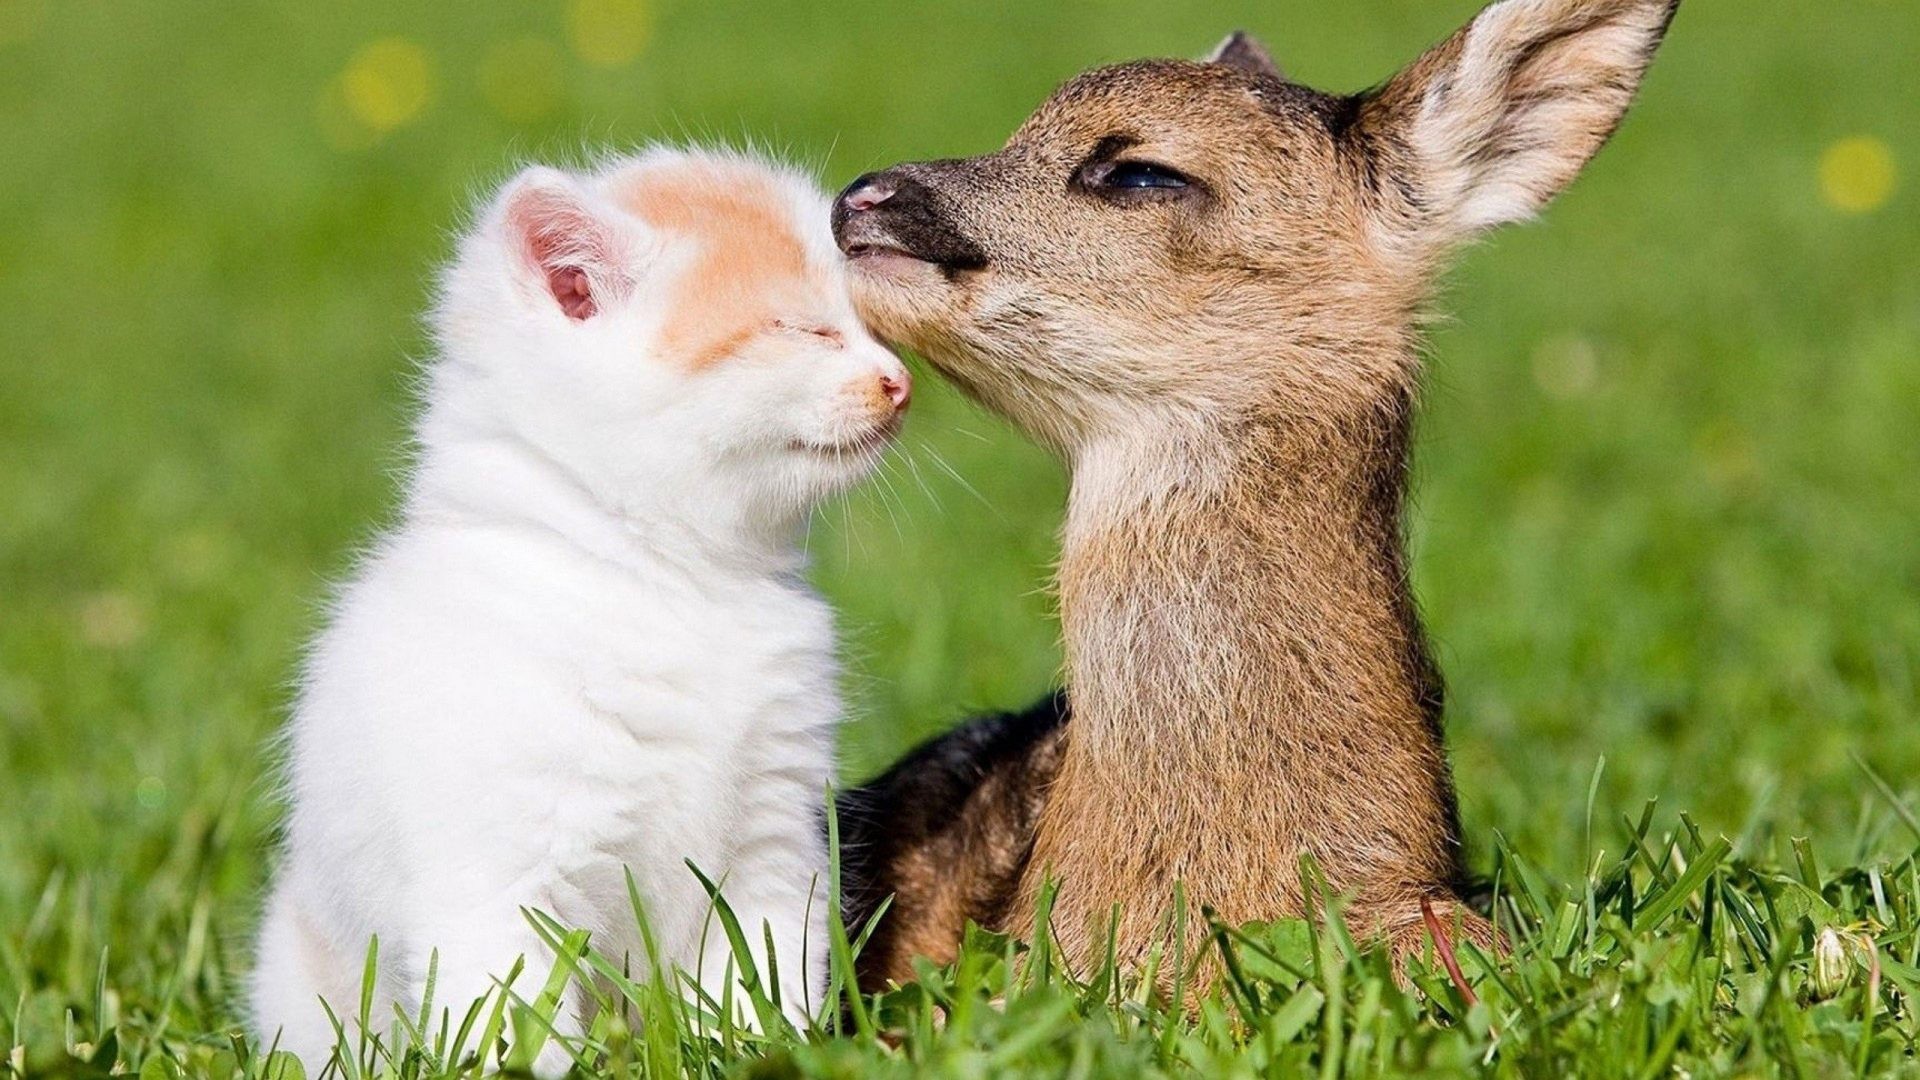 1920x1080 Farm Tag - Farm Amazing Child Cute Animal Cat Beauty Deer Super Pictures Of  Baby Animals